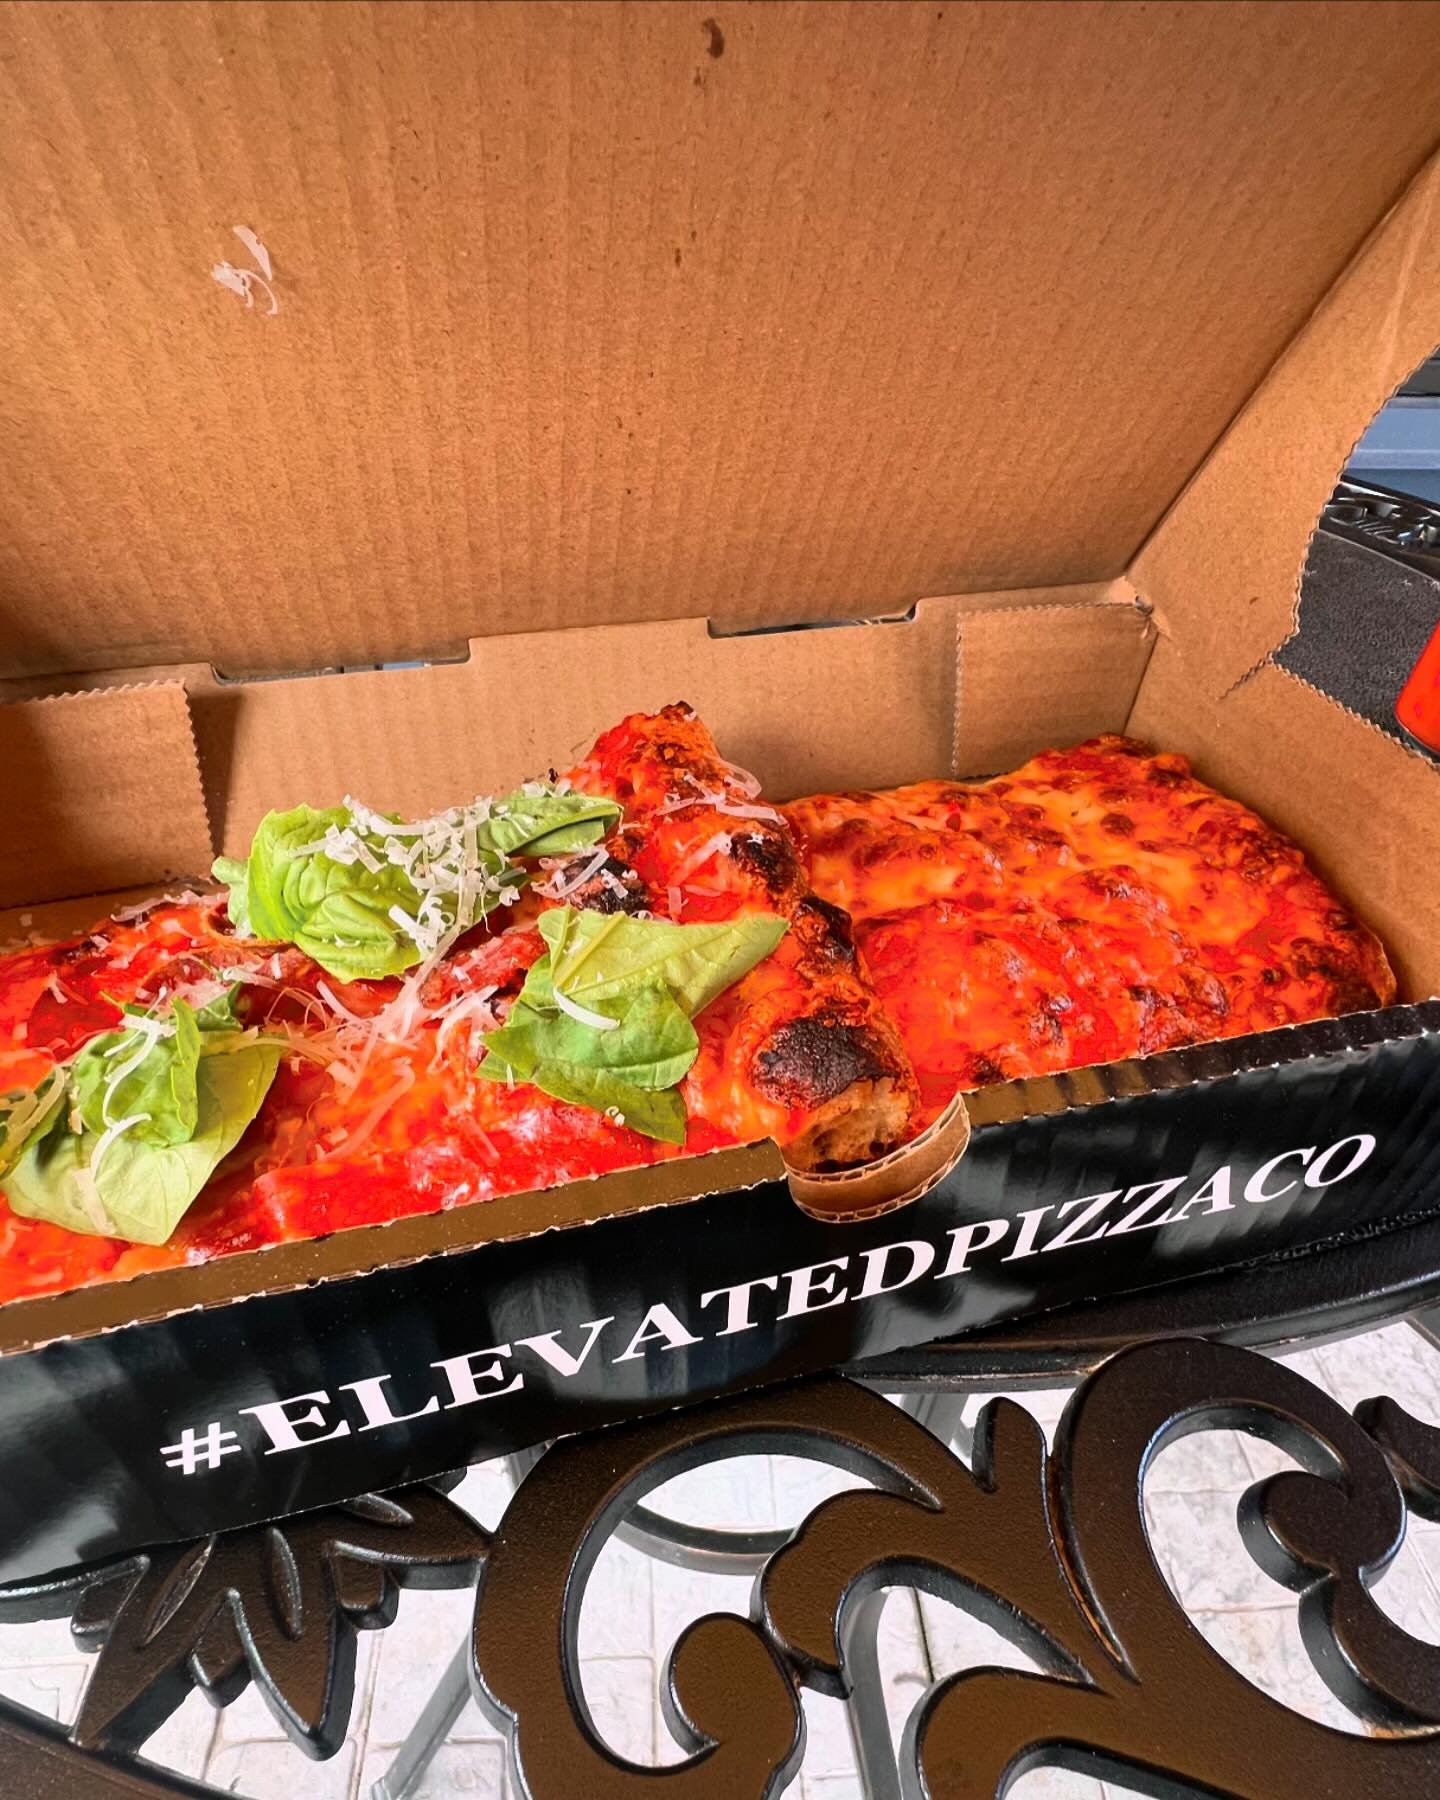 Always love a quick stop by @elevatedpizzaco in @district1881 - you have to stop by for a slice or two&hellip; better yet an entire pie!
#aroundchilliwack